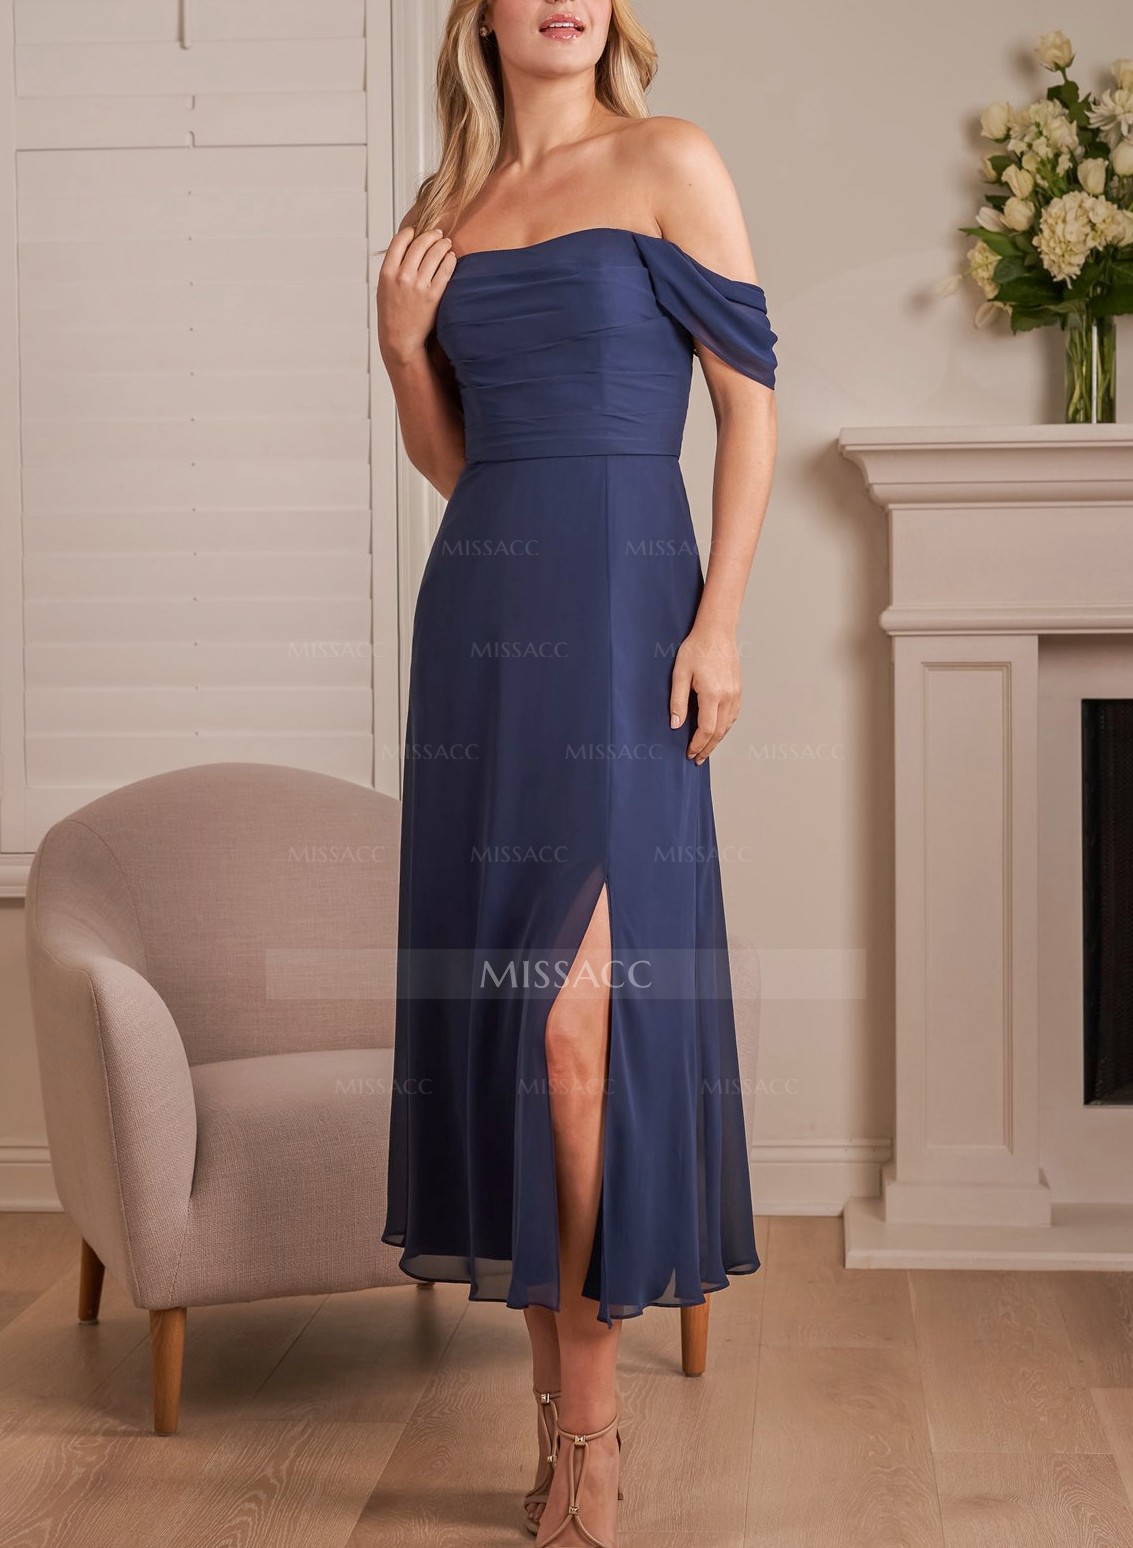 Short Off-the-Shoulder Bridesmaid Dresses With A-Line Chiffon